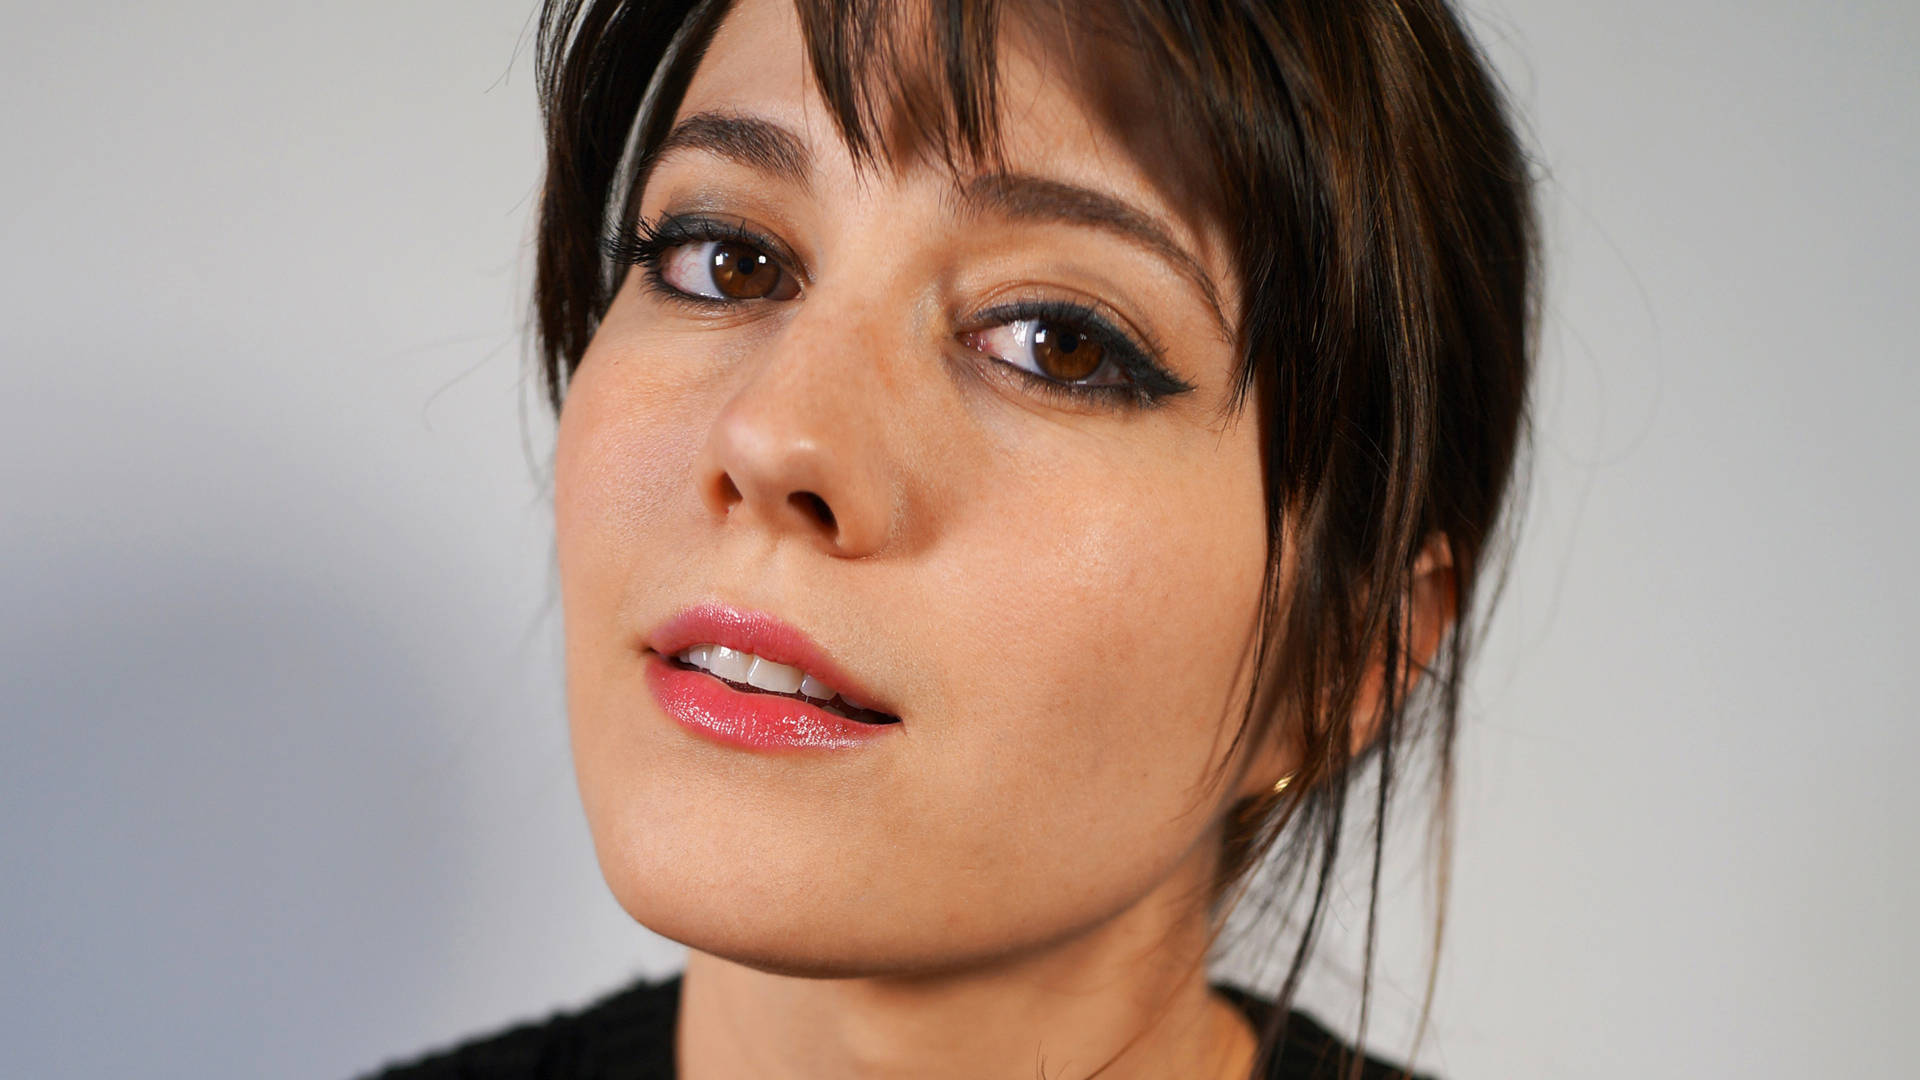 Maryelizabeth Winstead Vackert Ansikte. (note: In Swedish, Adjectives Often Come After The Noun They Describe, So 